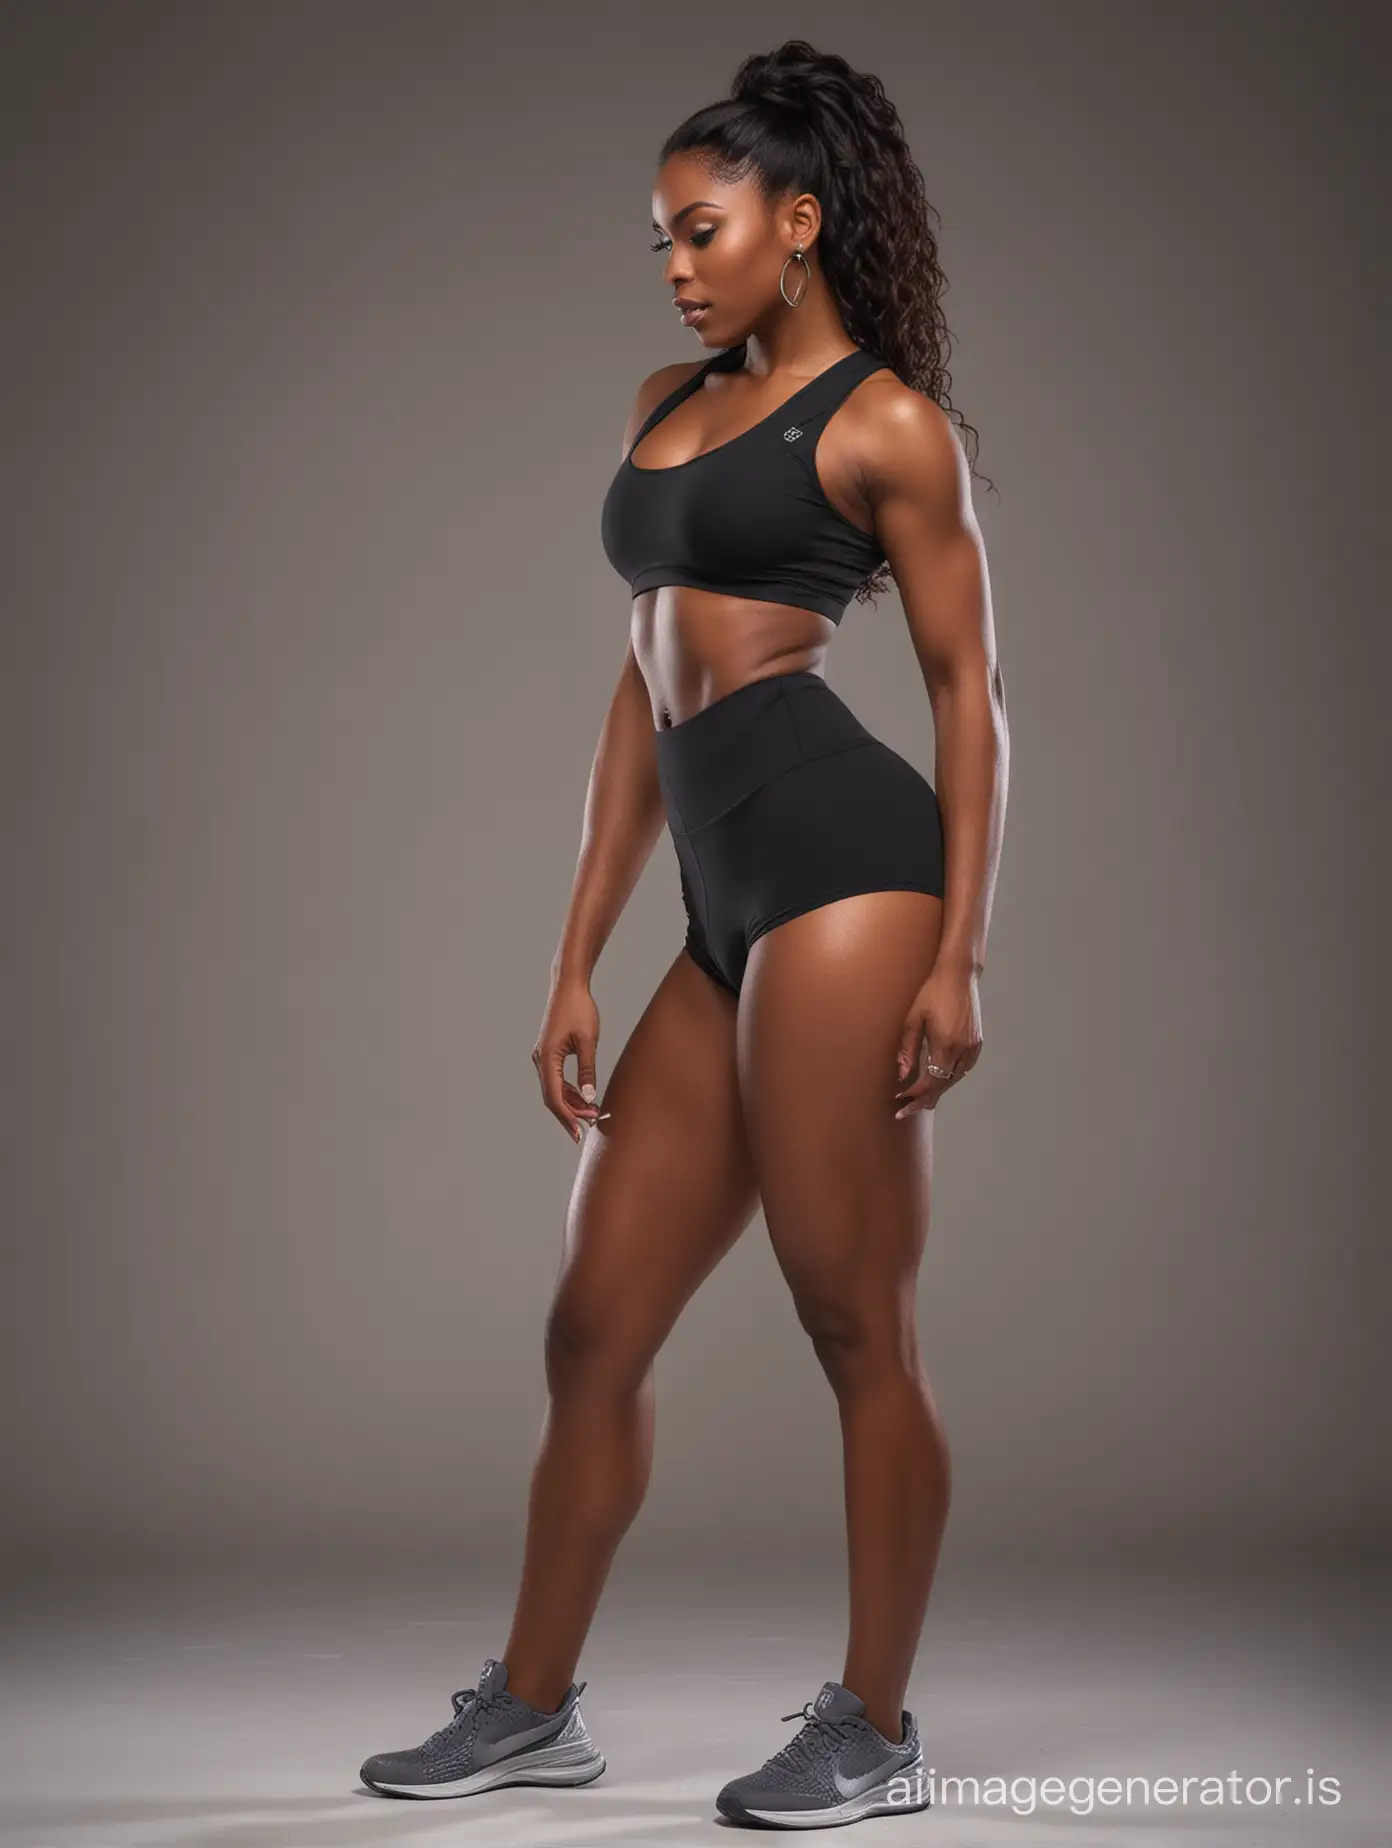 Athletic-Black-Female-with-Toned-Glutes-Engaging-in-Fitness-Workout